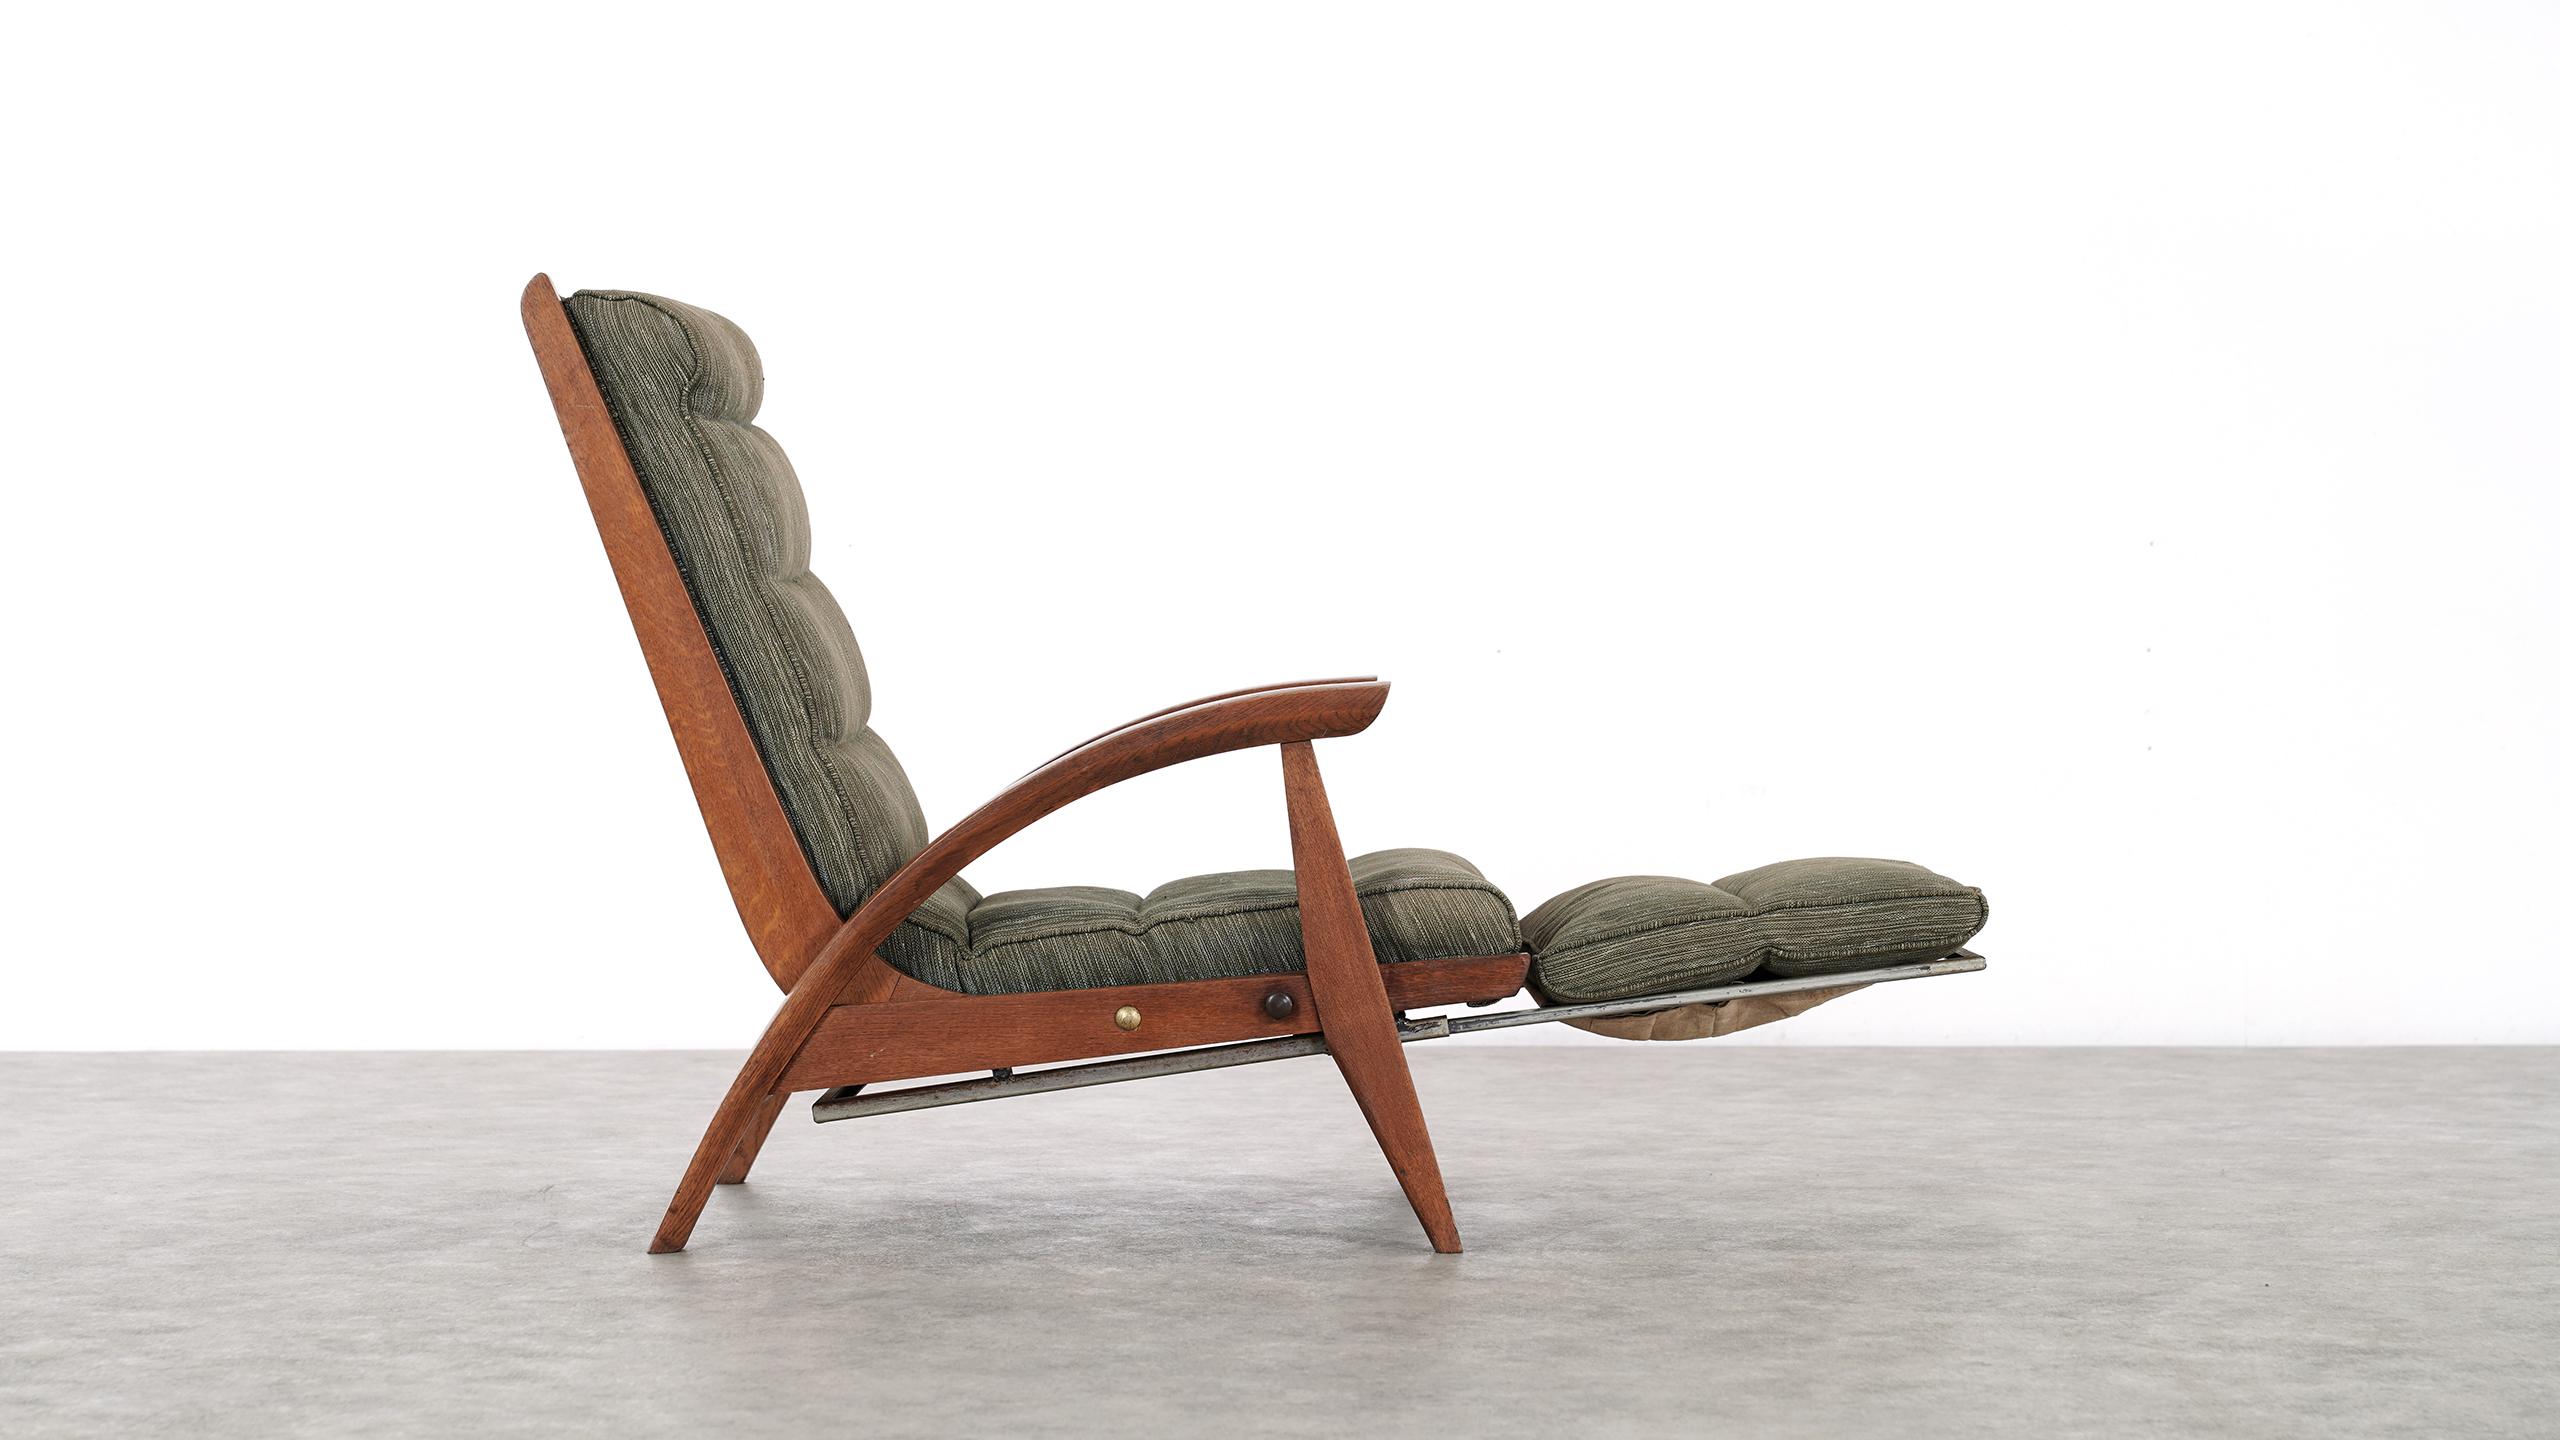 Wood Guy Besnard FS 134 Reclining Lounge Chair, 1954 for Free Span, France Prouvé